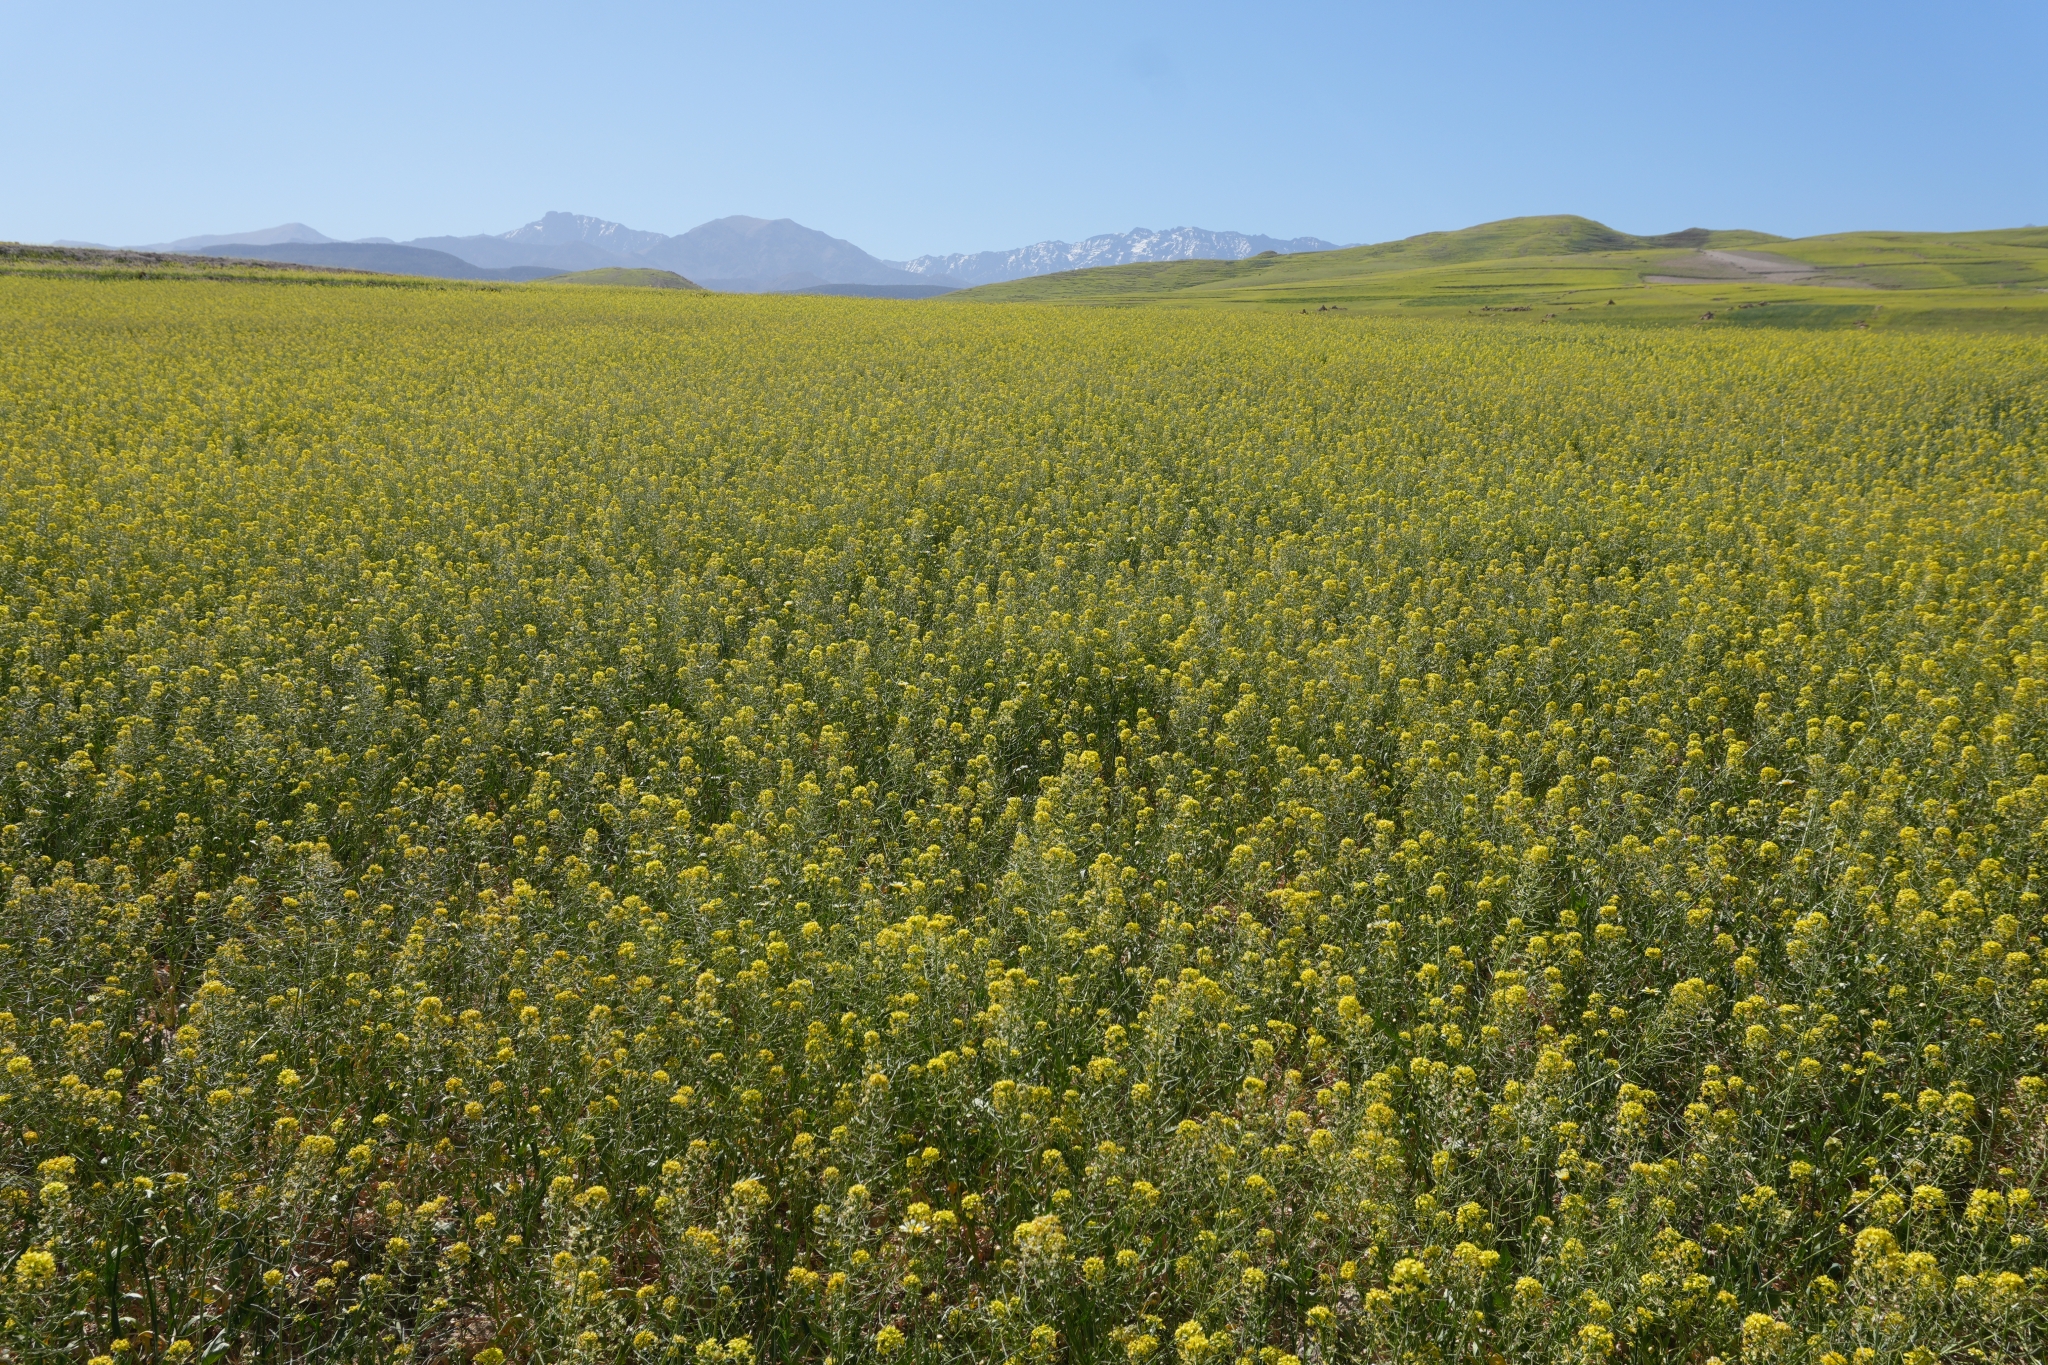 Sample image of canola flowers and a clear blue sky in Morocco, showing the resolution 